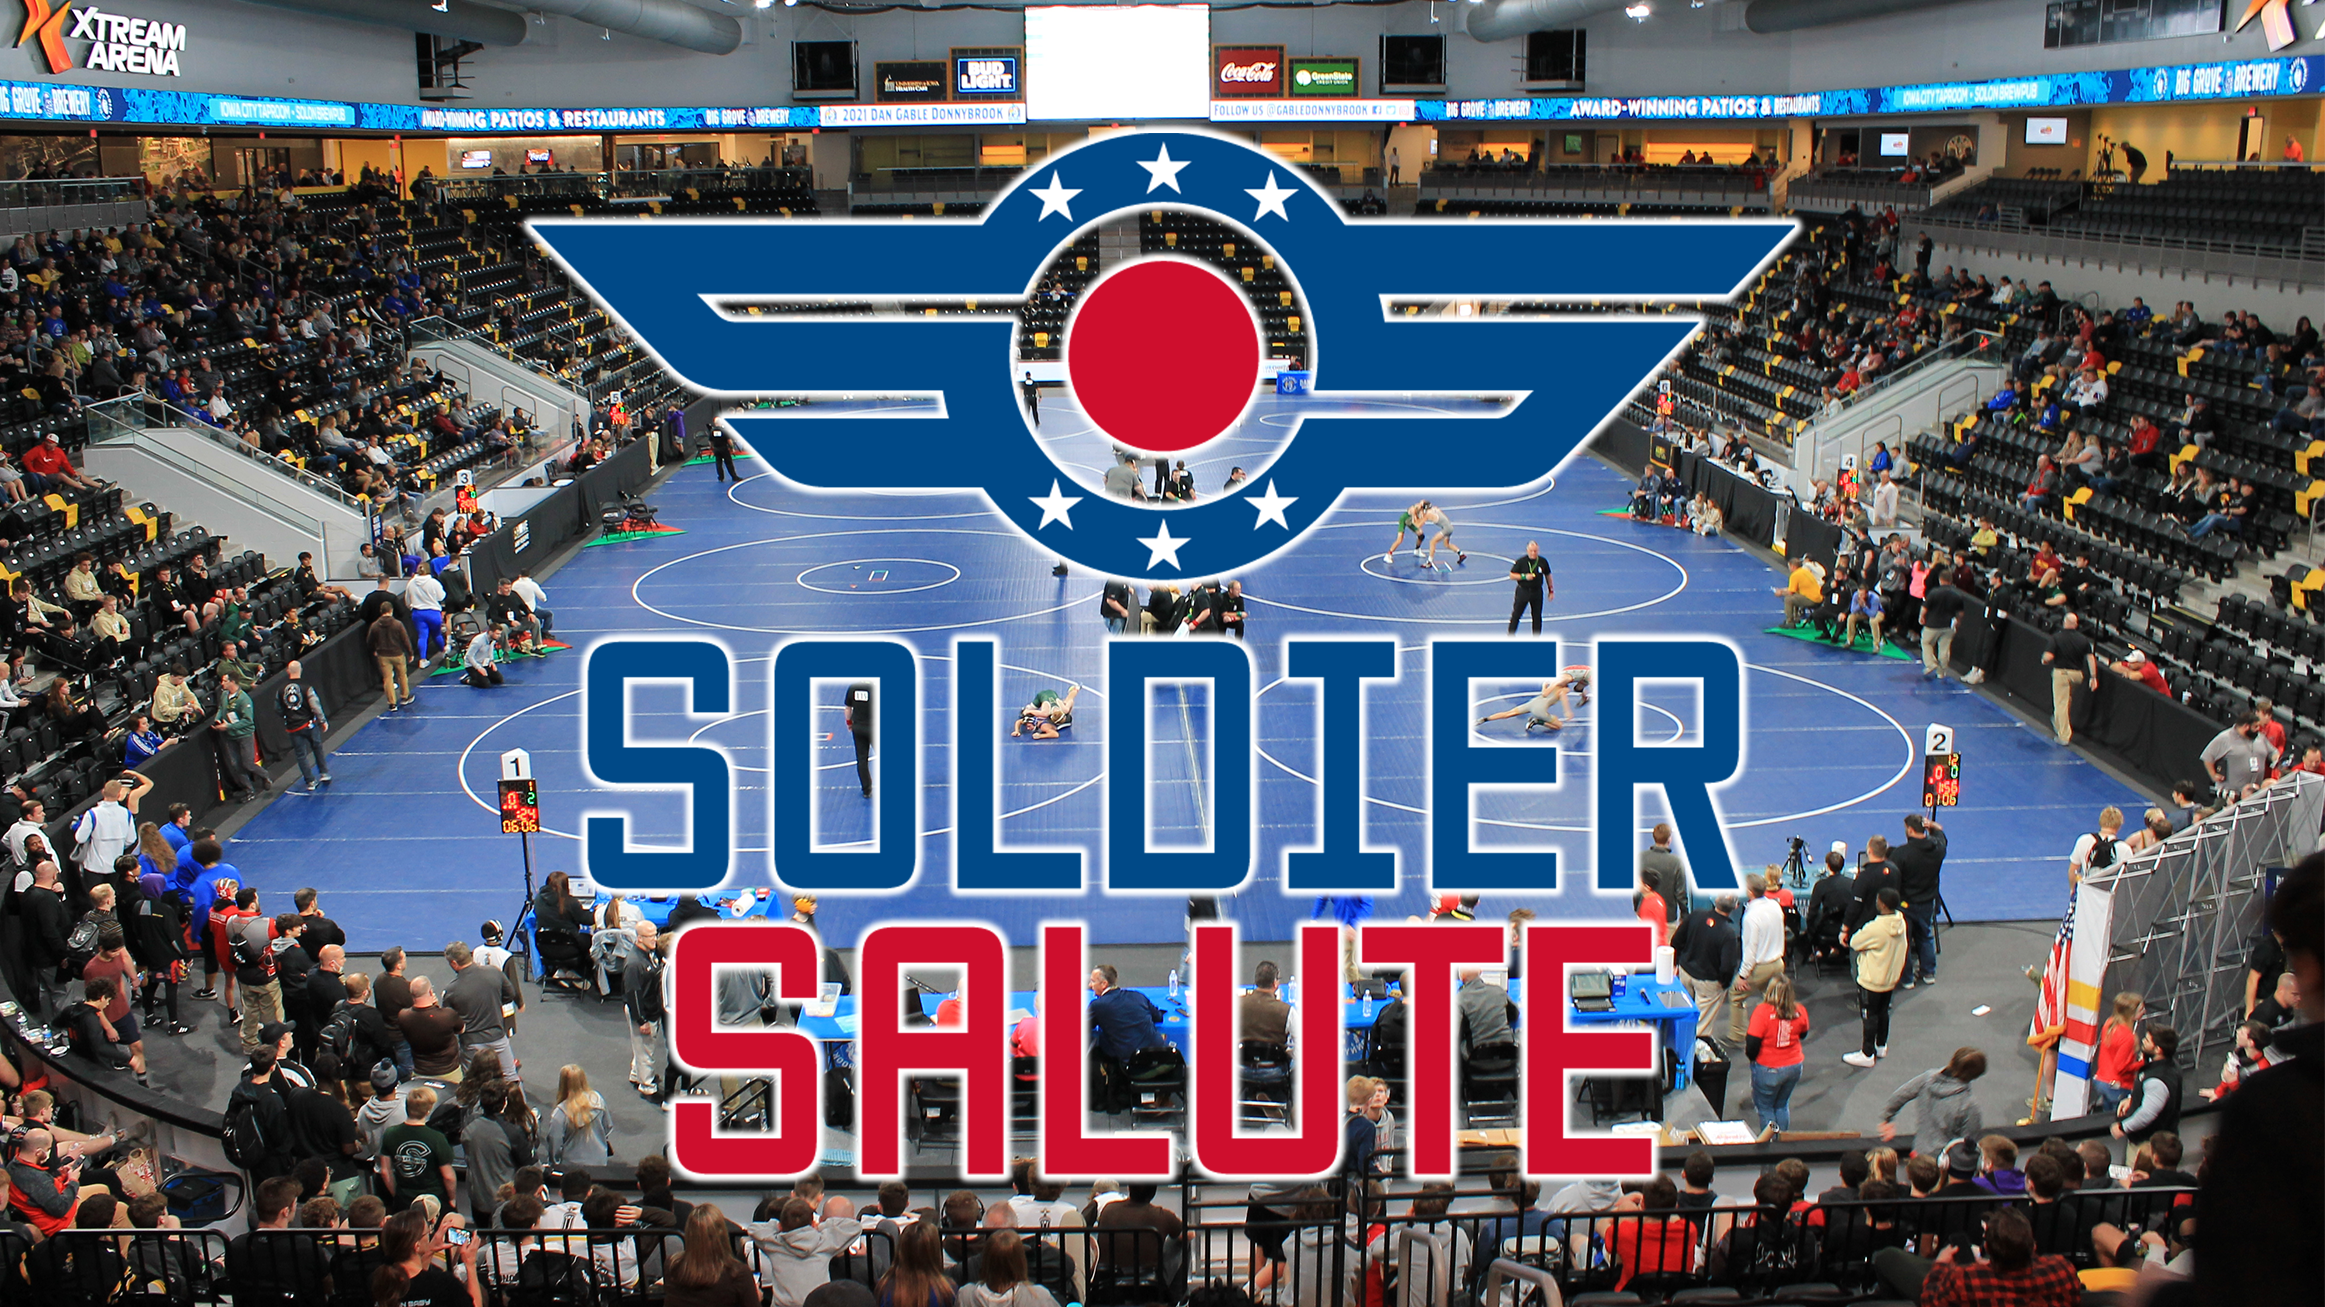 Soldier Salute background